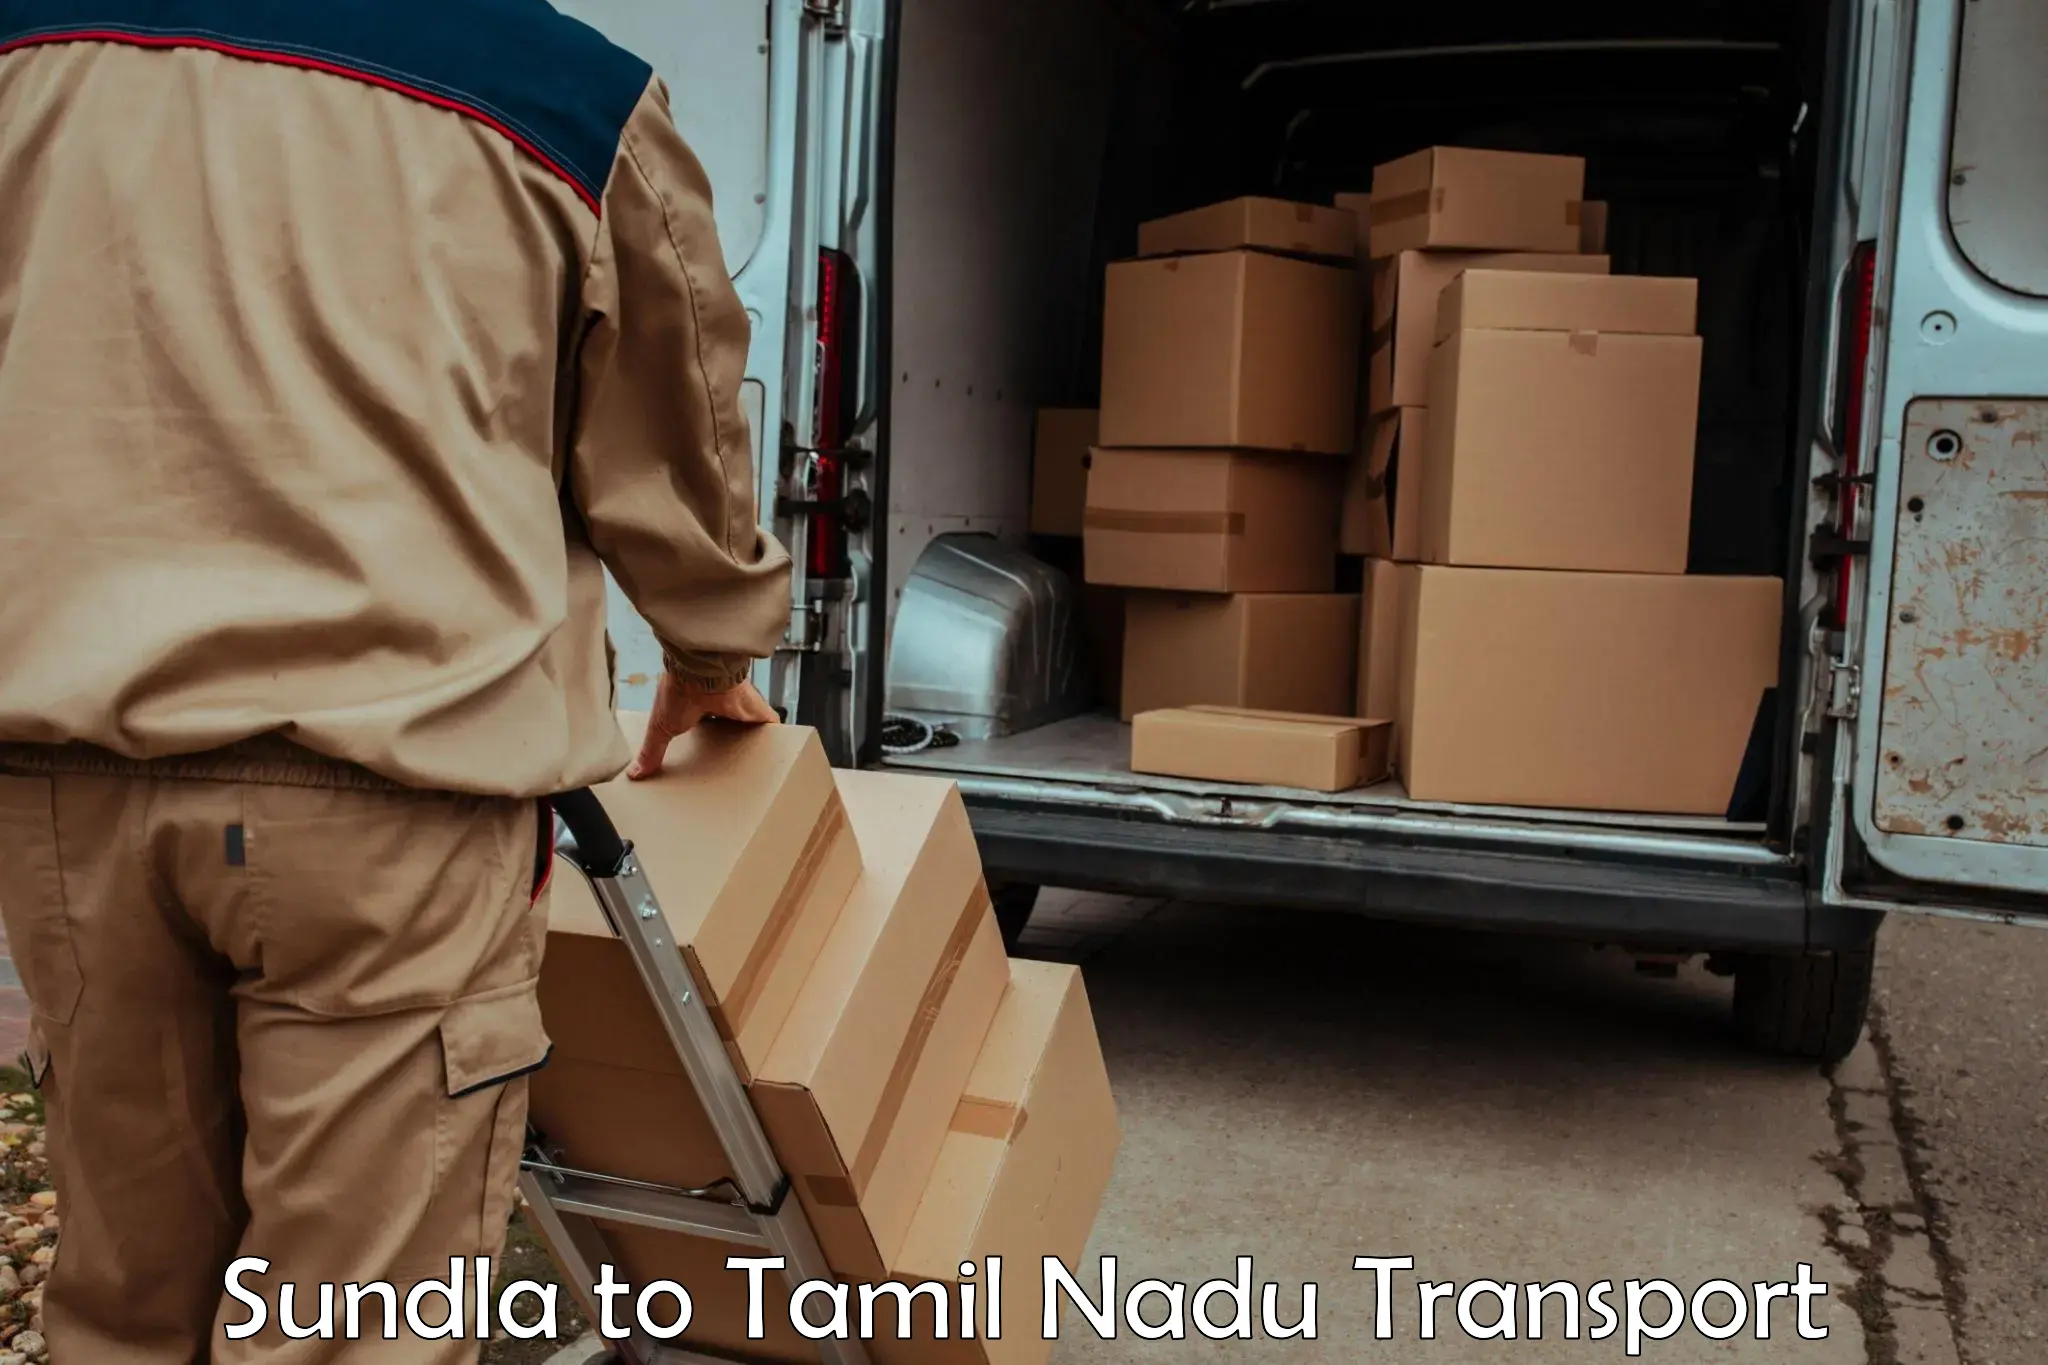 India truck logistics services Sundla to Meenakshi Academy of Higher Education and Research Chennai